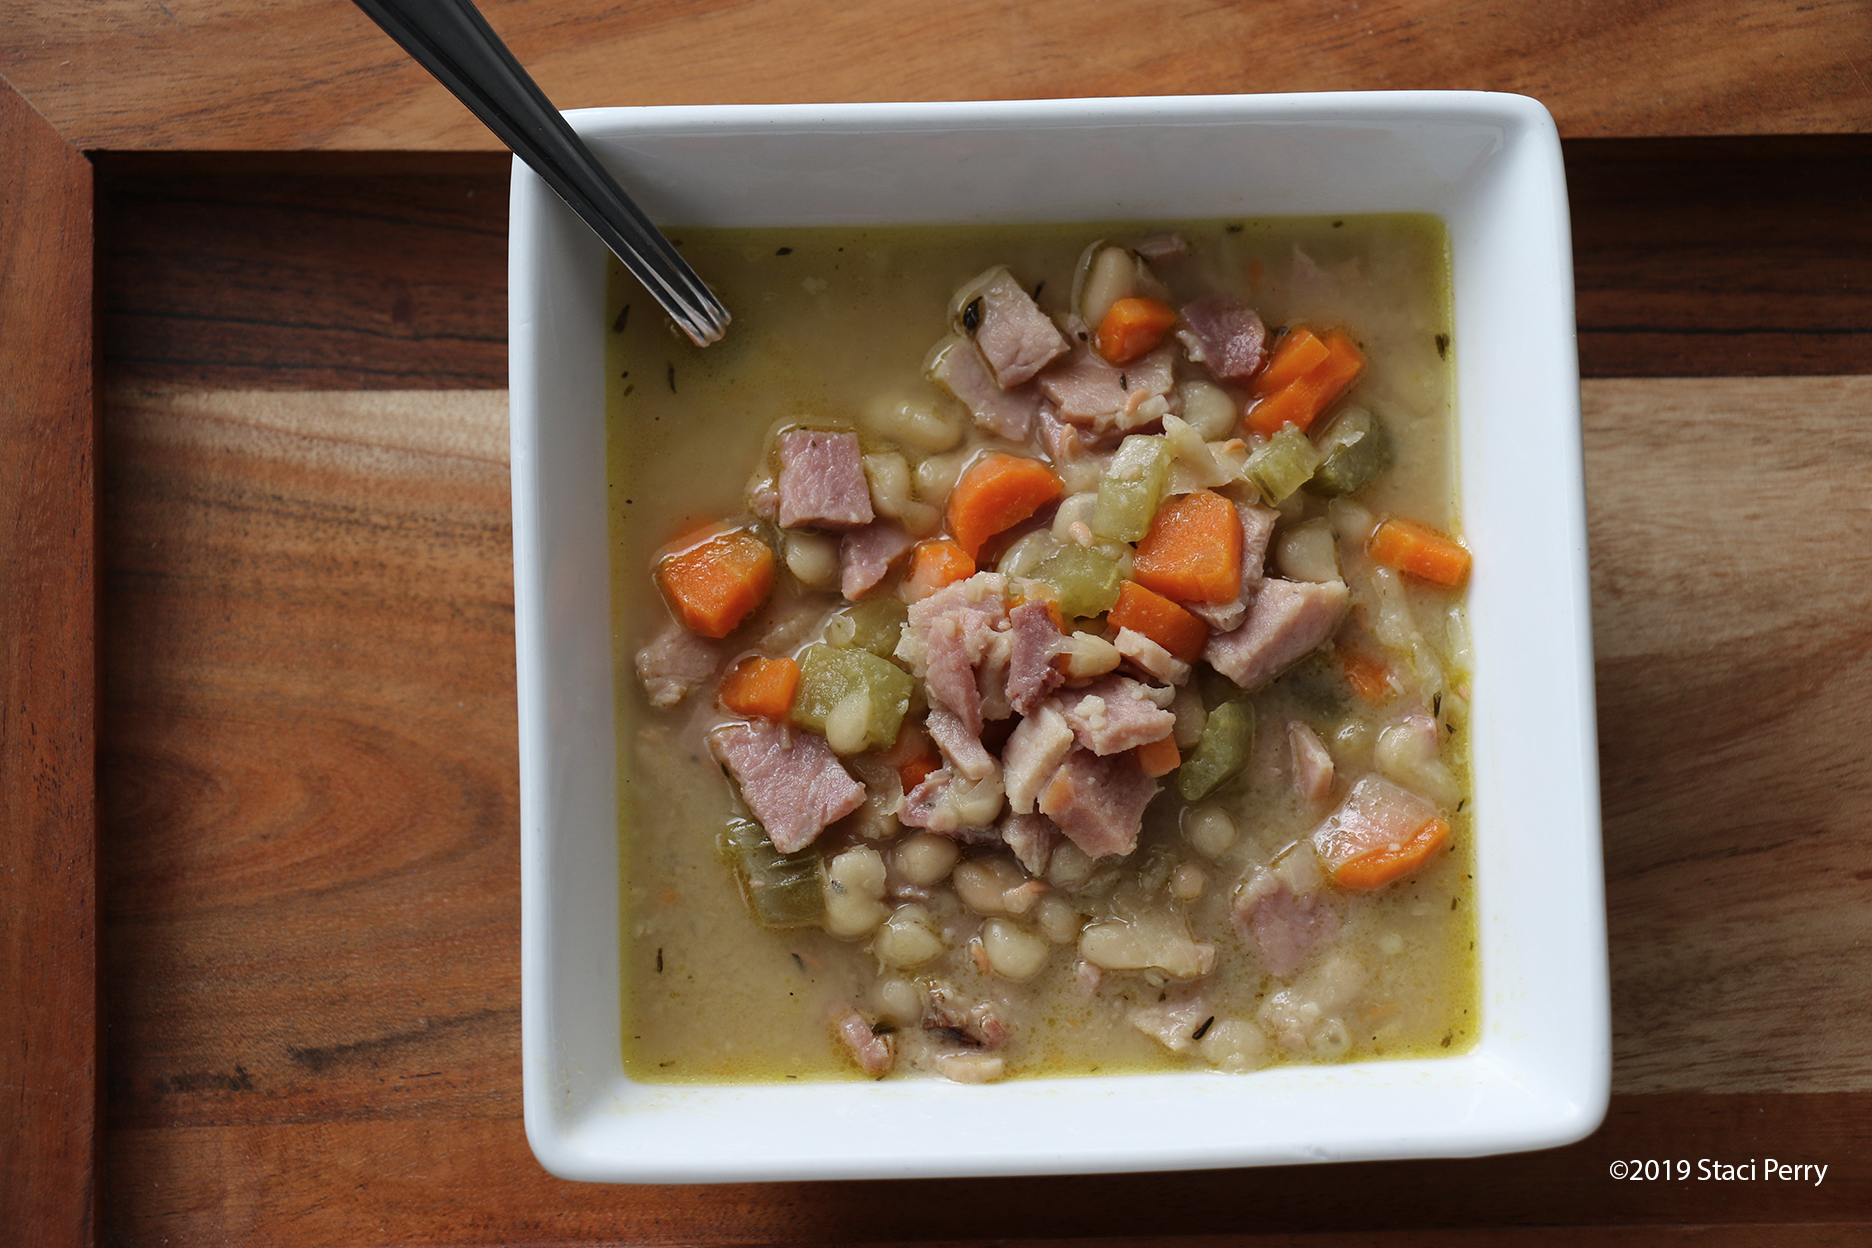 Save the Shank, Use Leftovers to Make Ham and Bean Soup